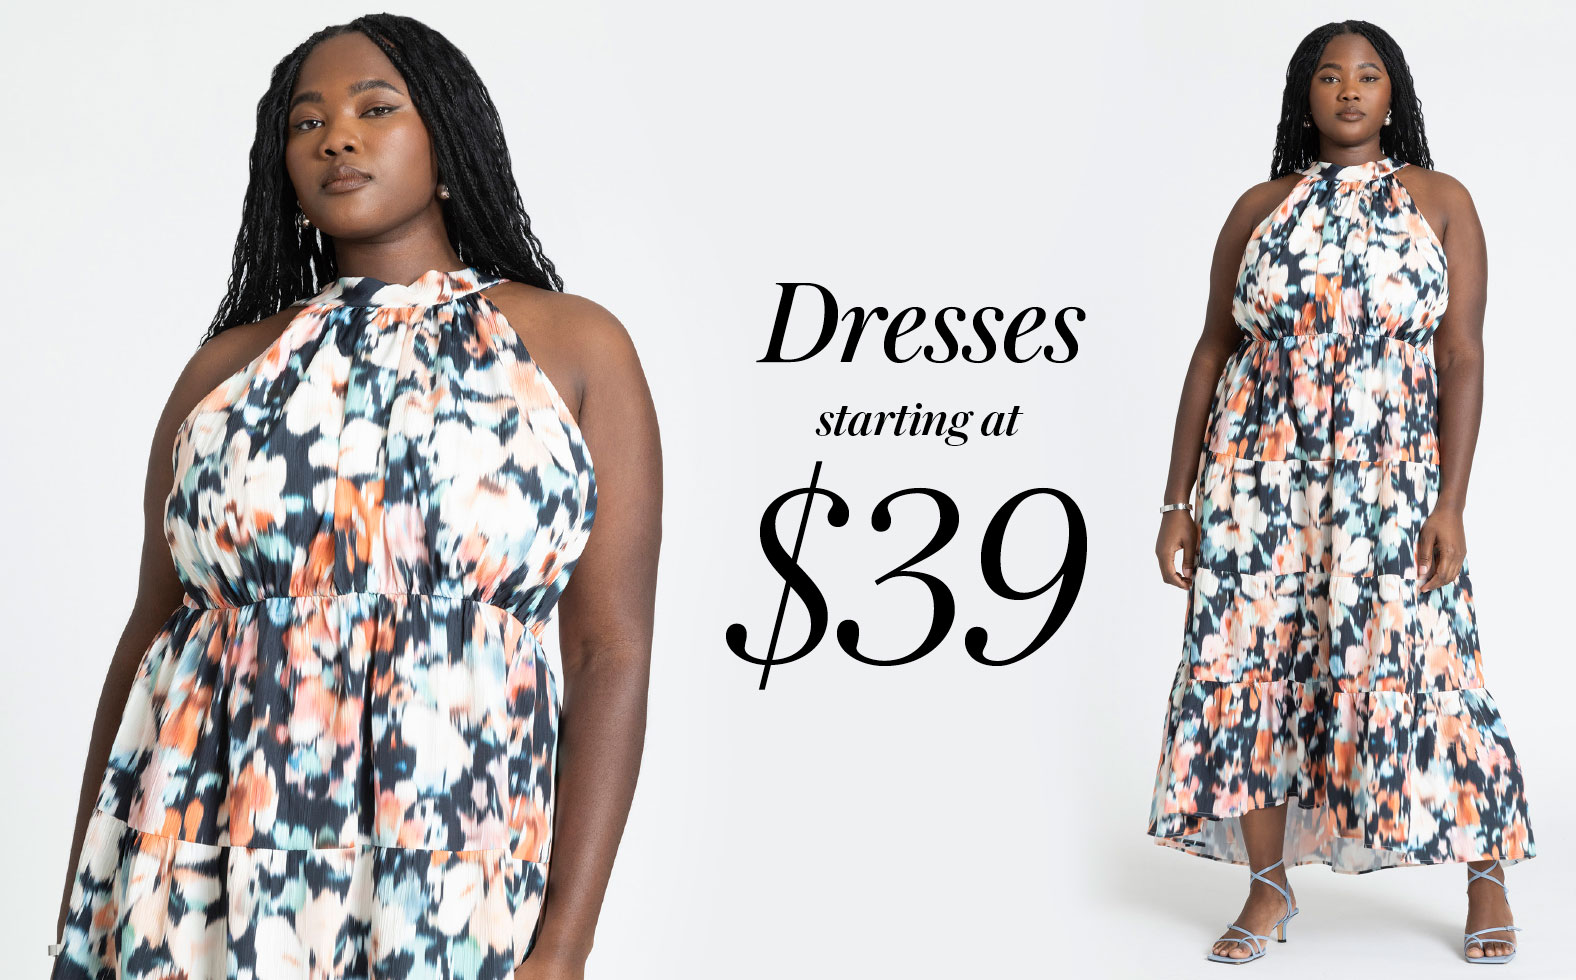 Plus size Clothing, Dresses, Skirts, Suits, Tops, Jeans and Pants for Women